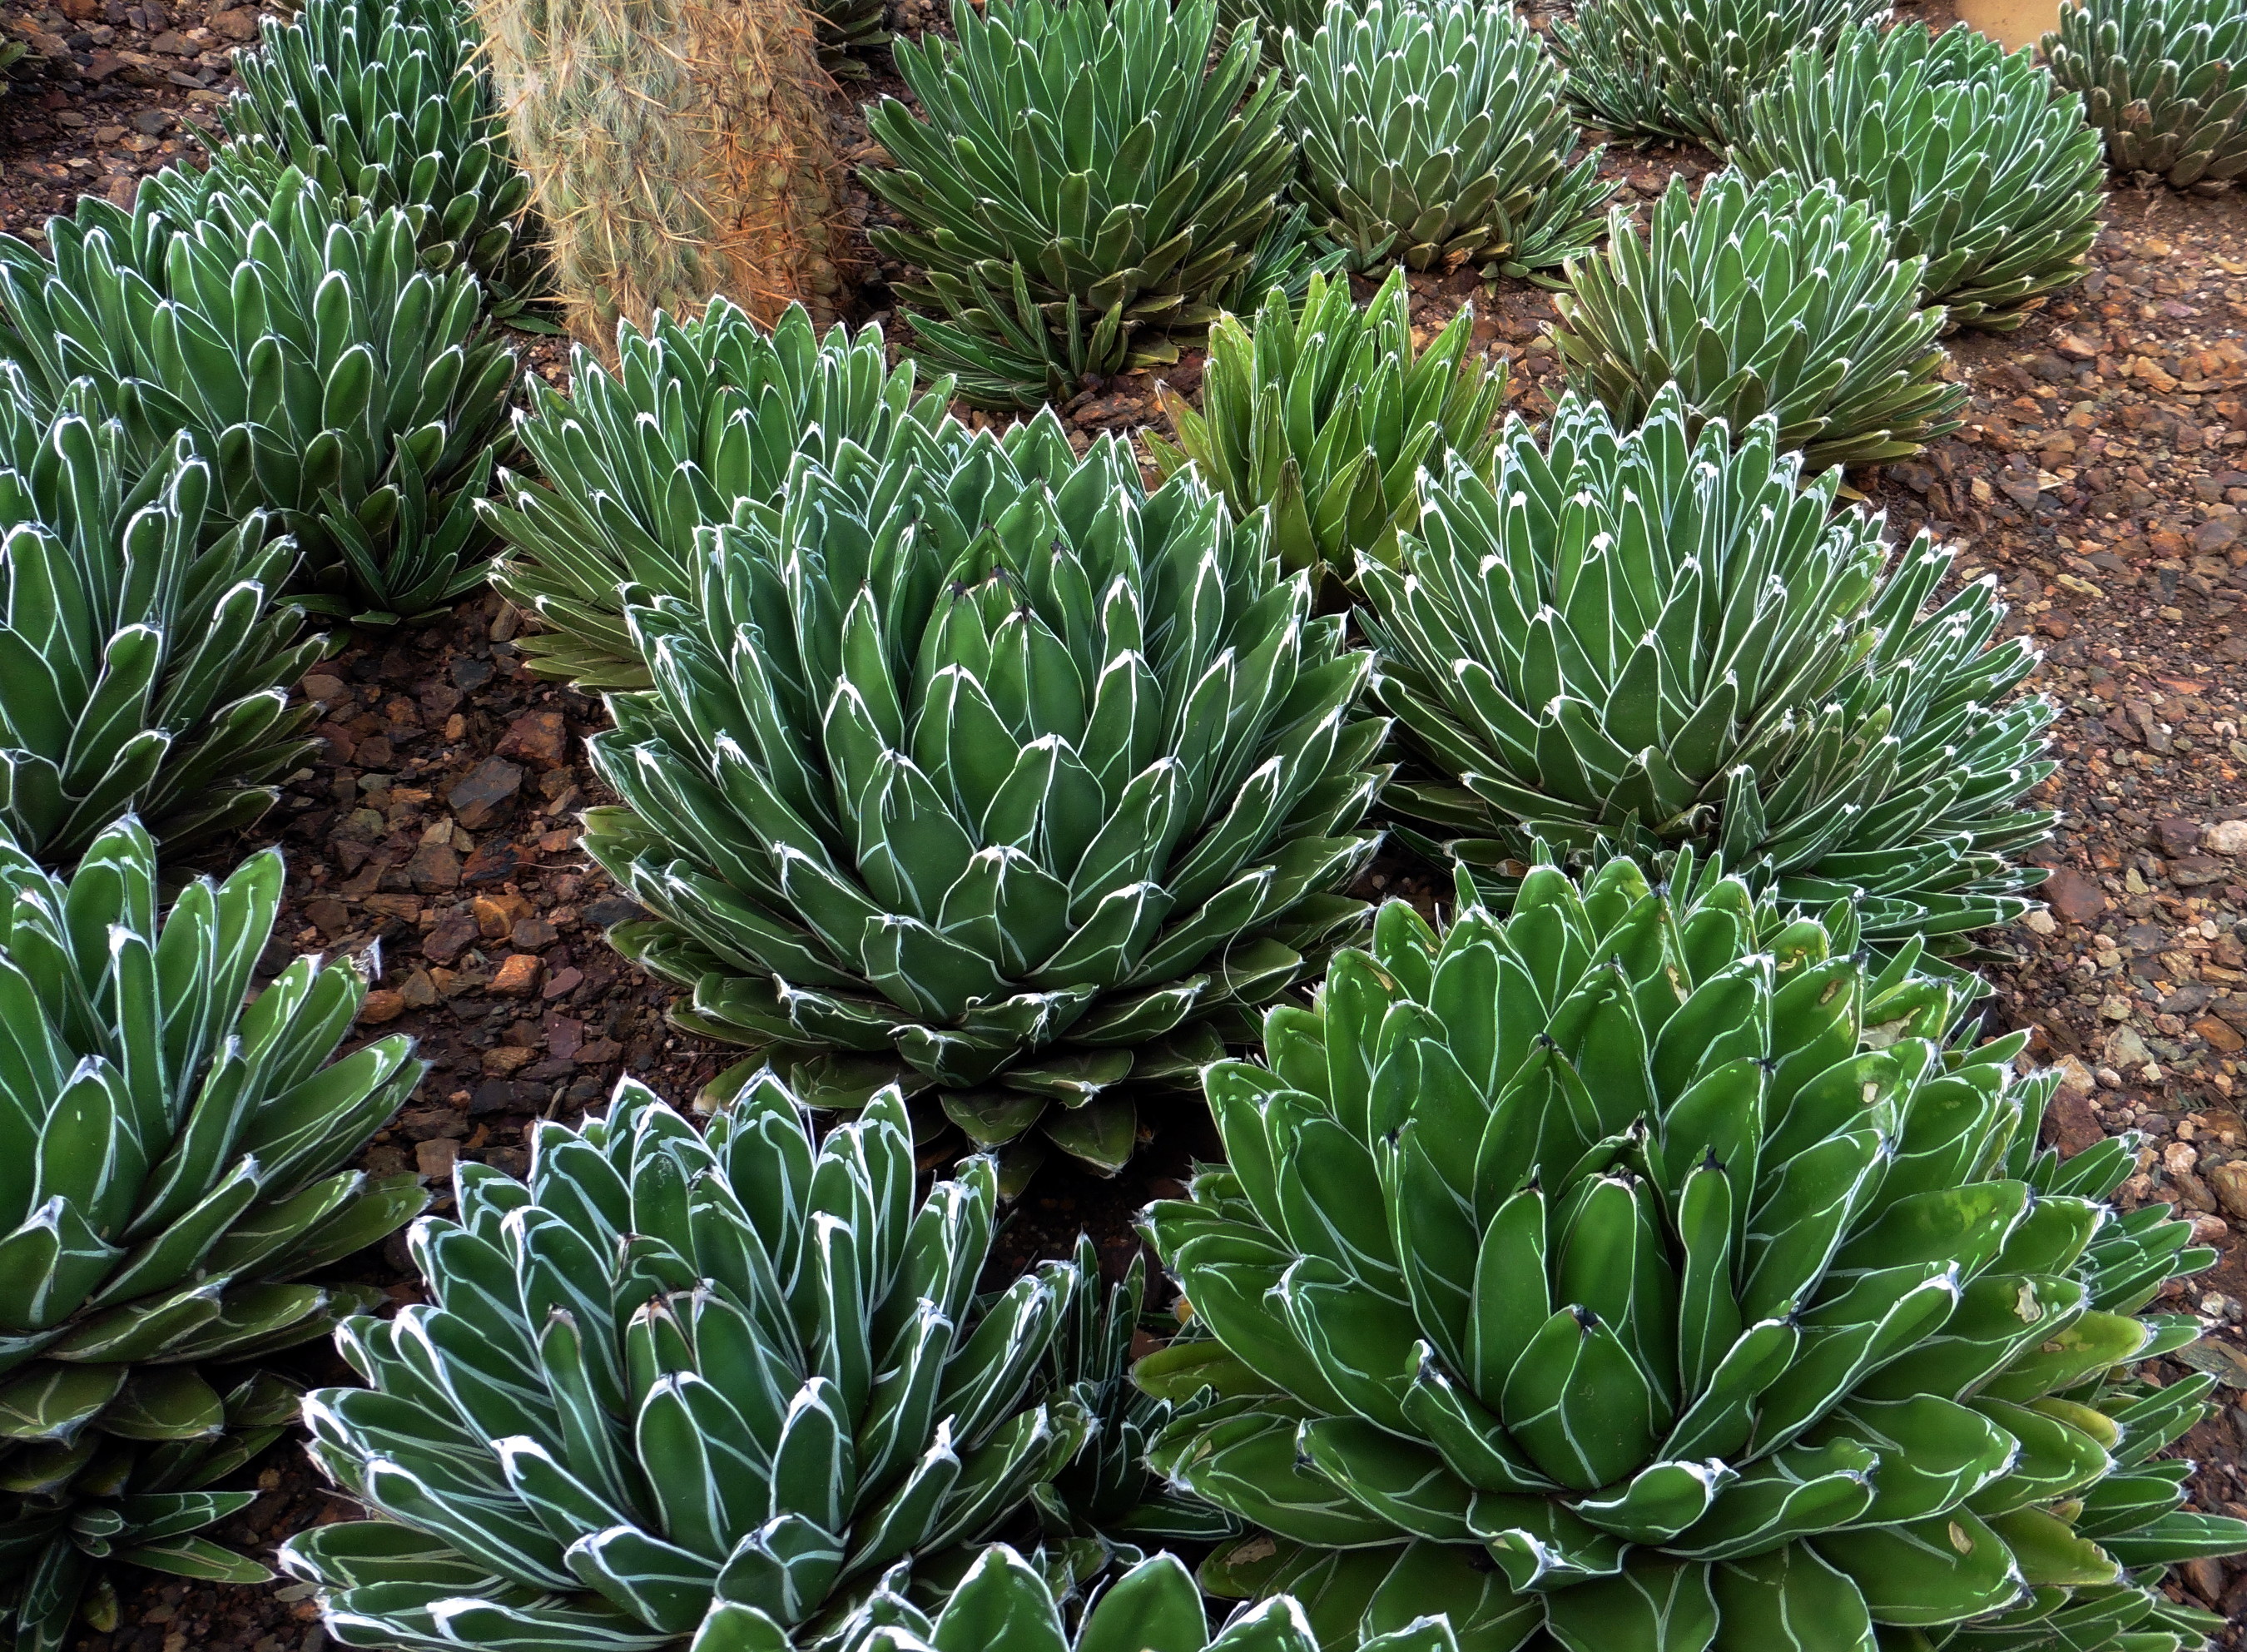 Queen Victoria Agave